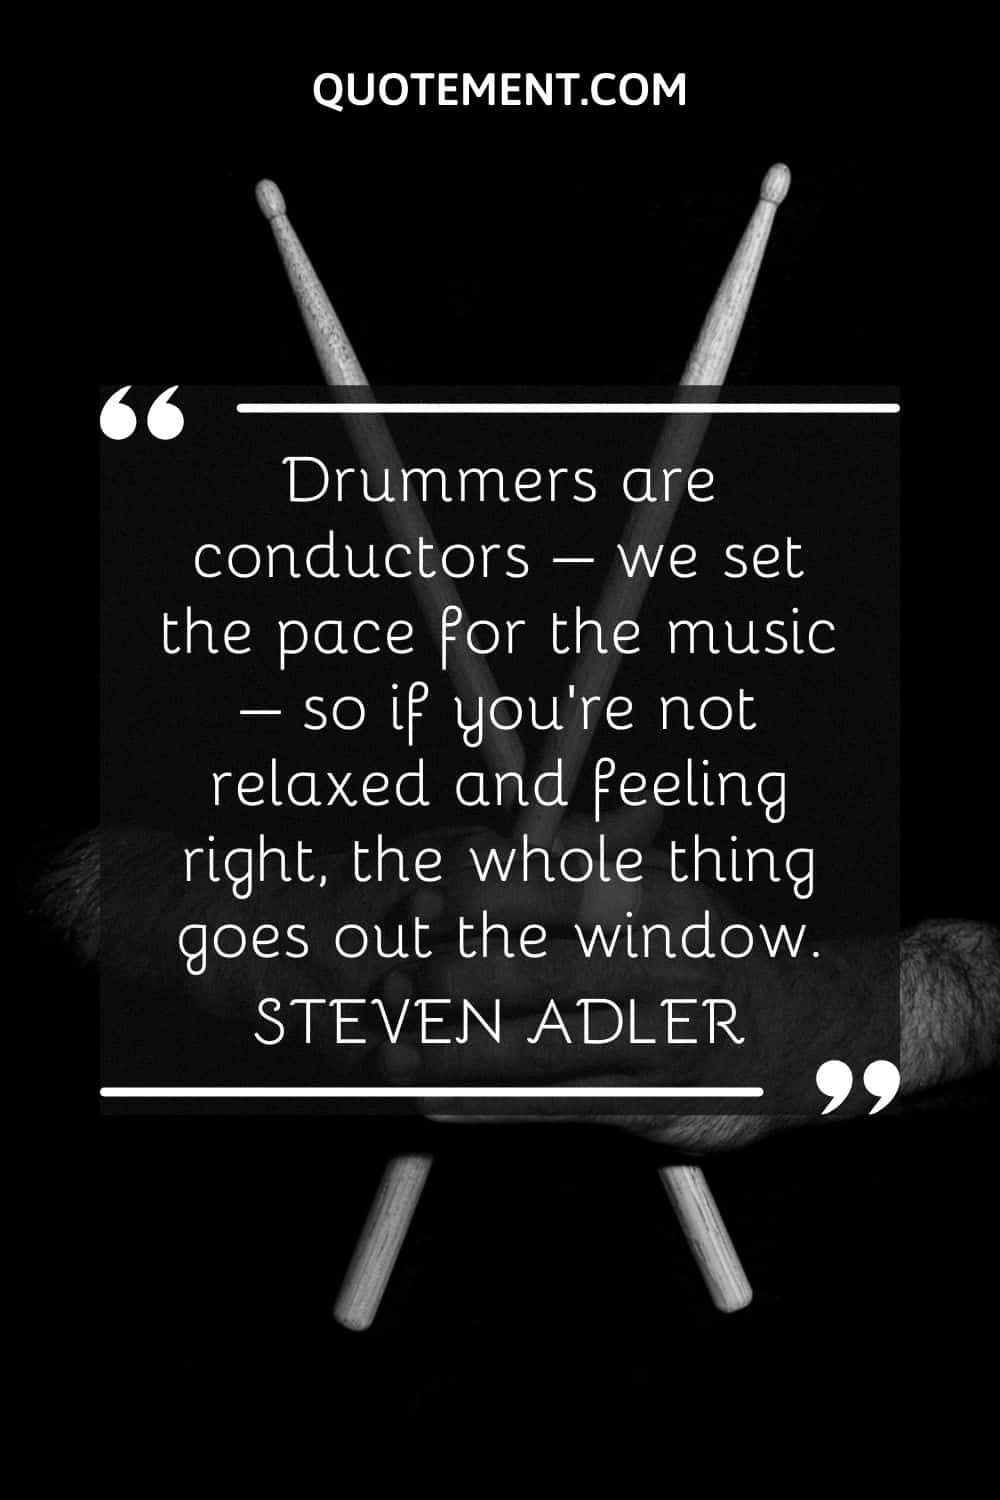 Drummers are conductors – we set the pace for the music